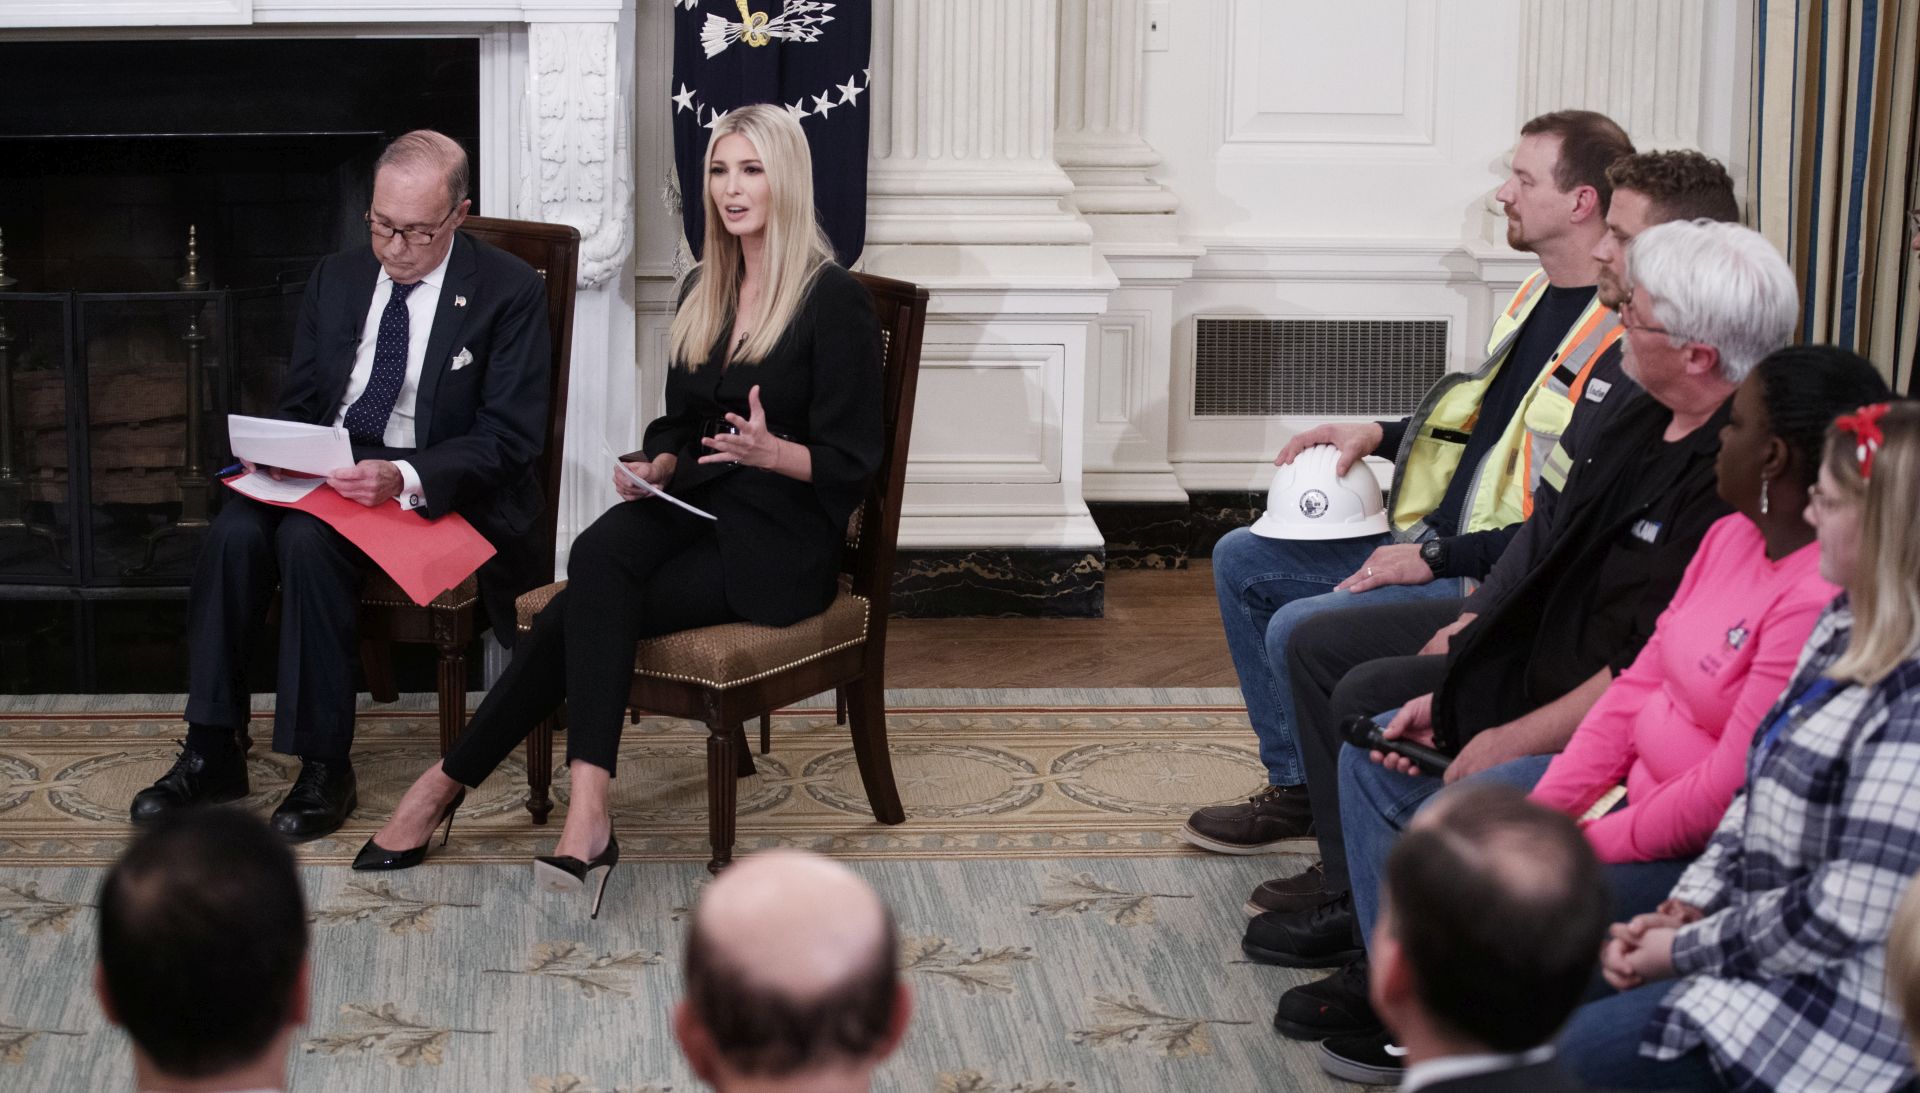 epa07134112 Director of the US National Economic Council Larry Kudlow (L) and Ivanka Trump (2-L) participate in an Our Pledge to America's Workers event in the State Dining Room of the White House in Washington, DC, USA, 31 October 2018.  EPA/SHAWN THEW